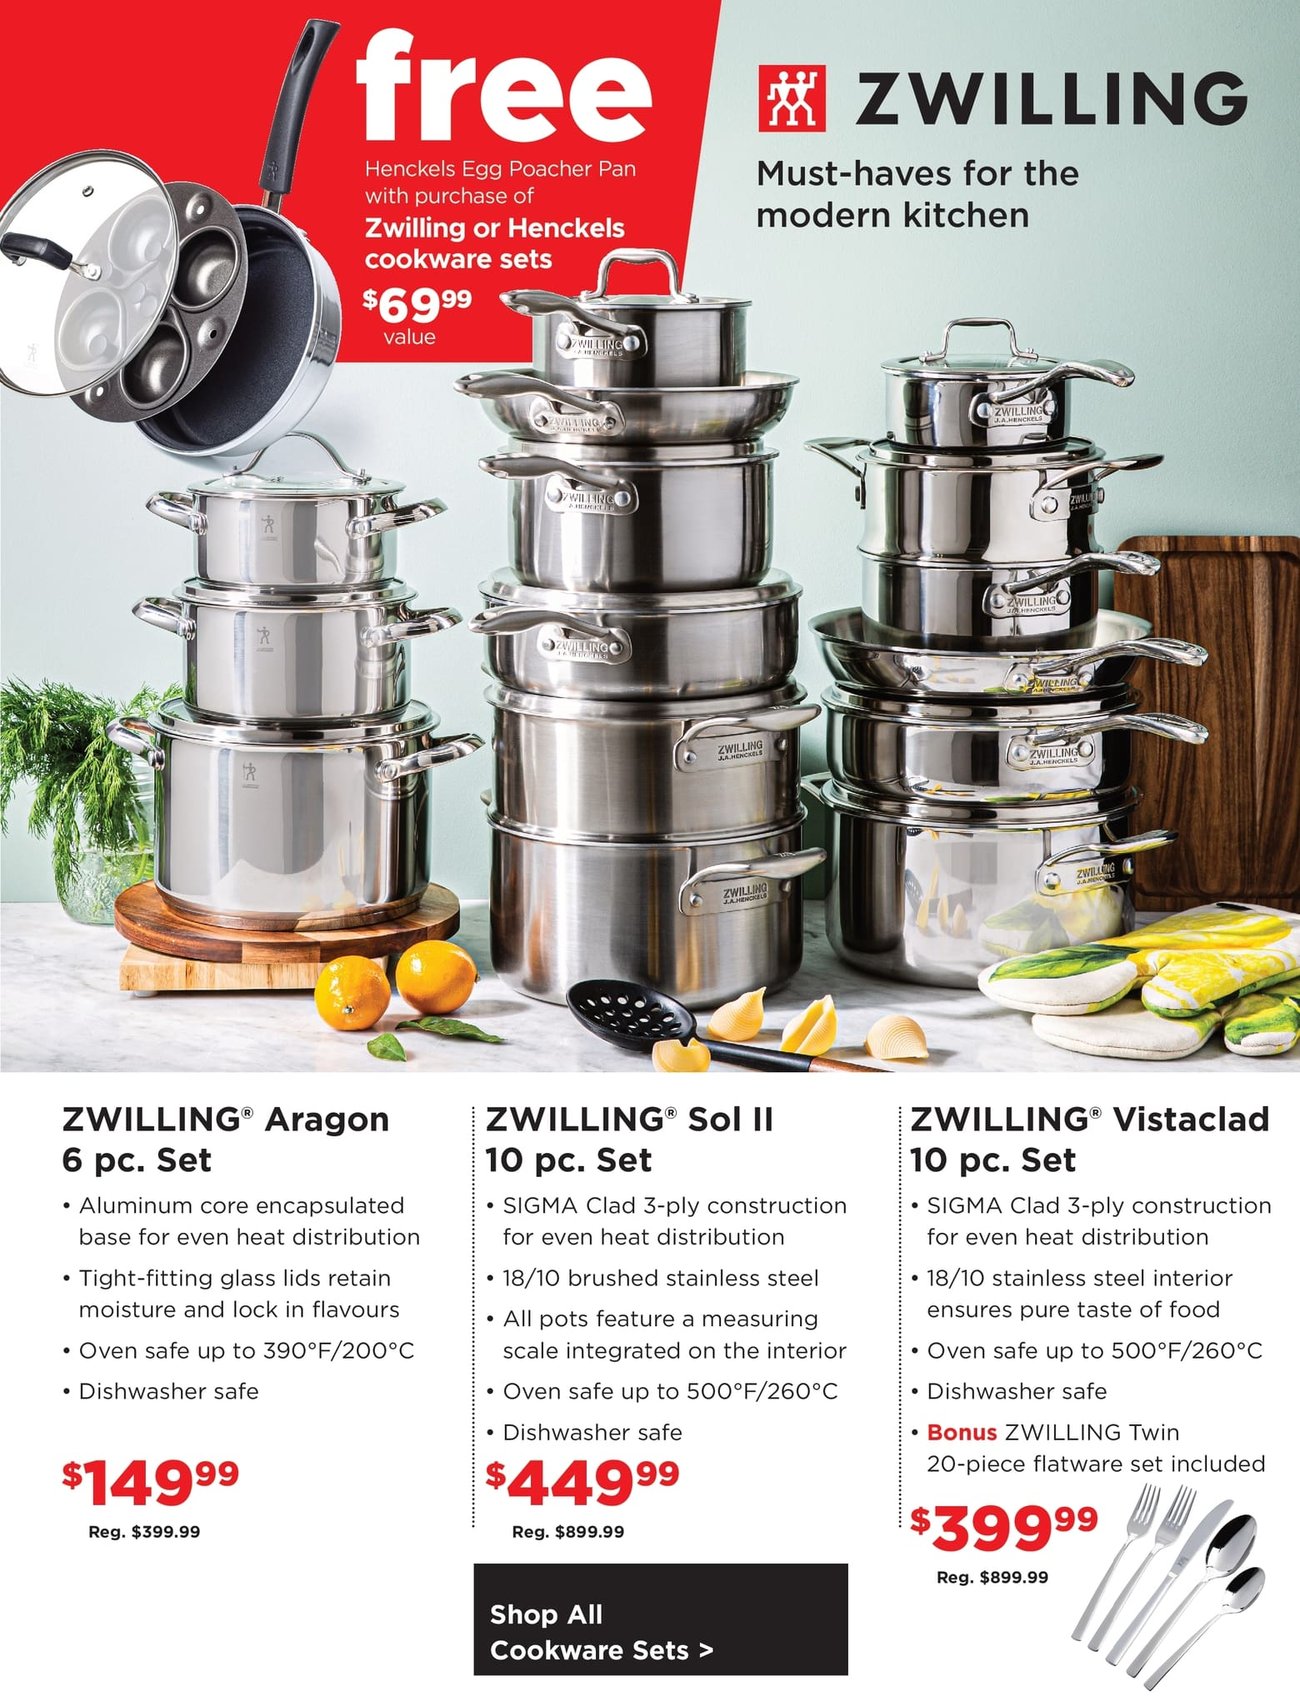 Kitchen Stuff Plus - Everything Cooking Sale - Page 12